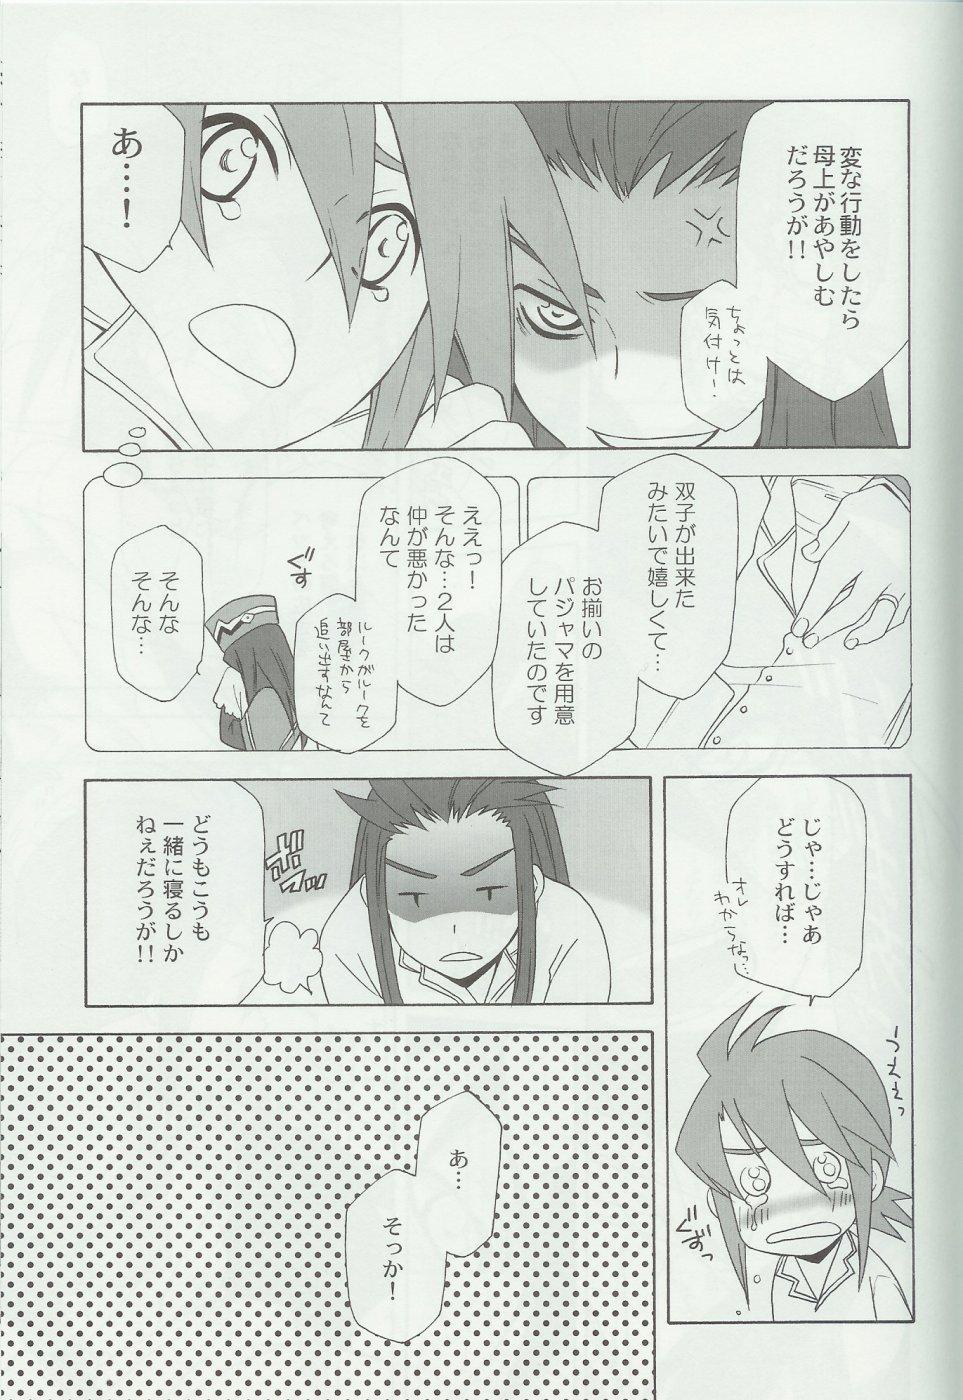 Concha flirt - Tales of the abyss Gay Gloryhole - Page 6